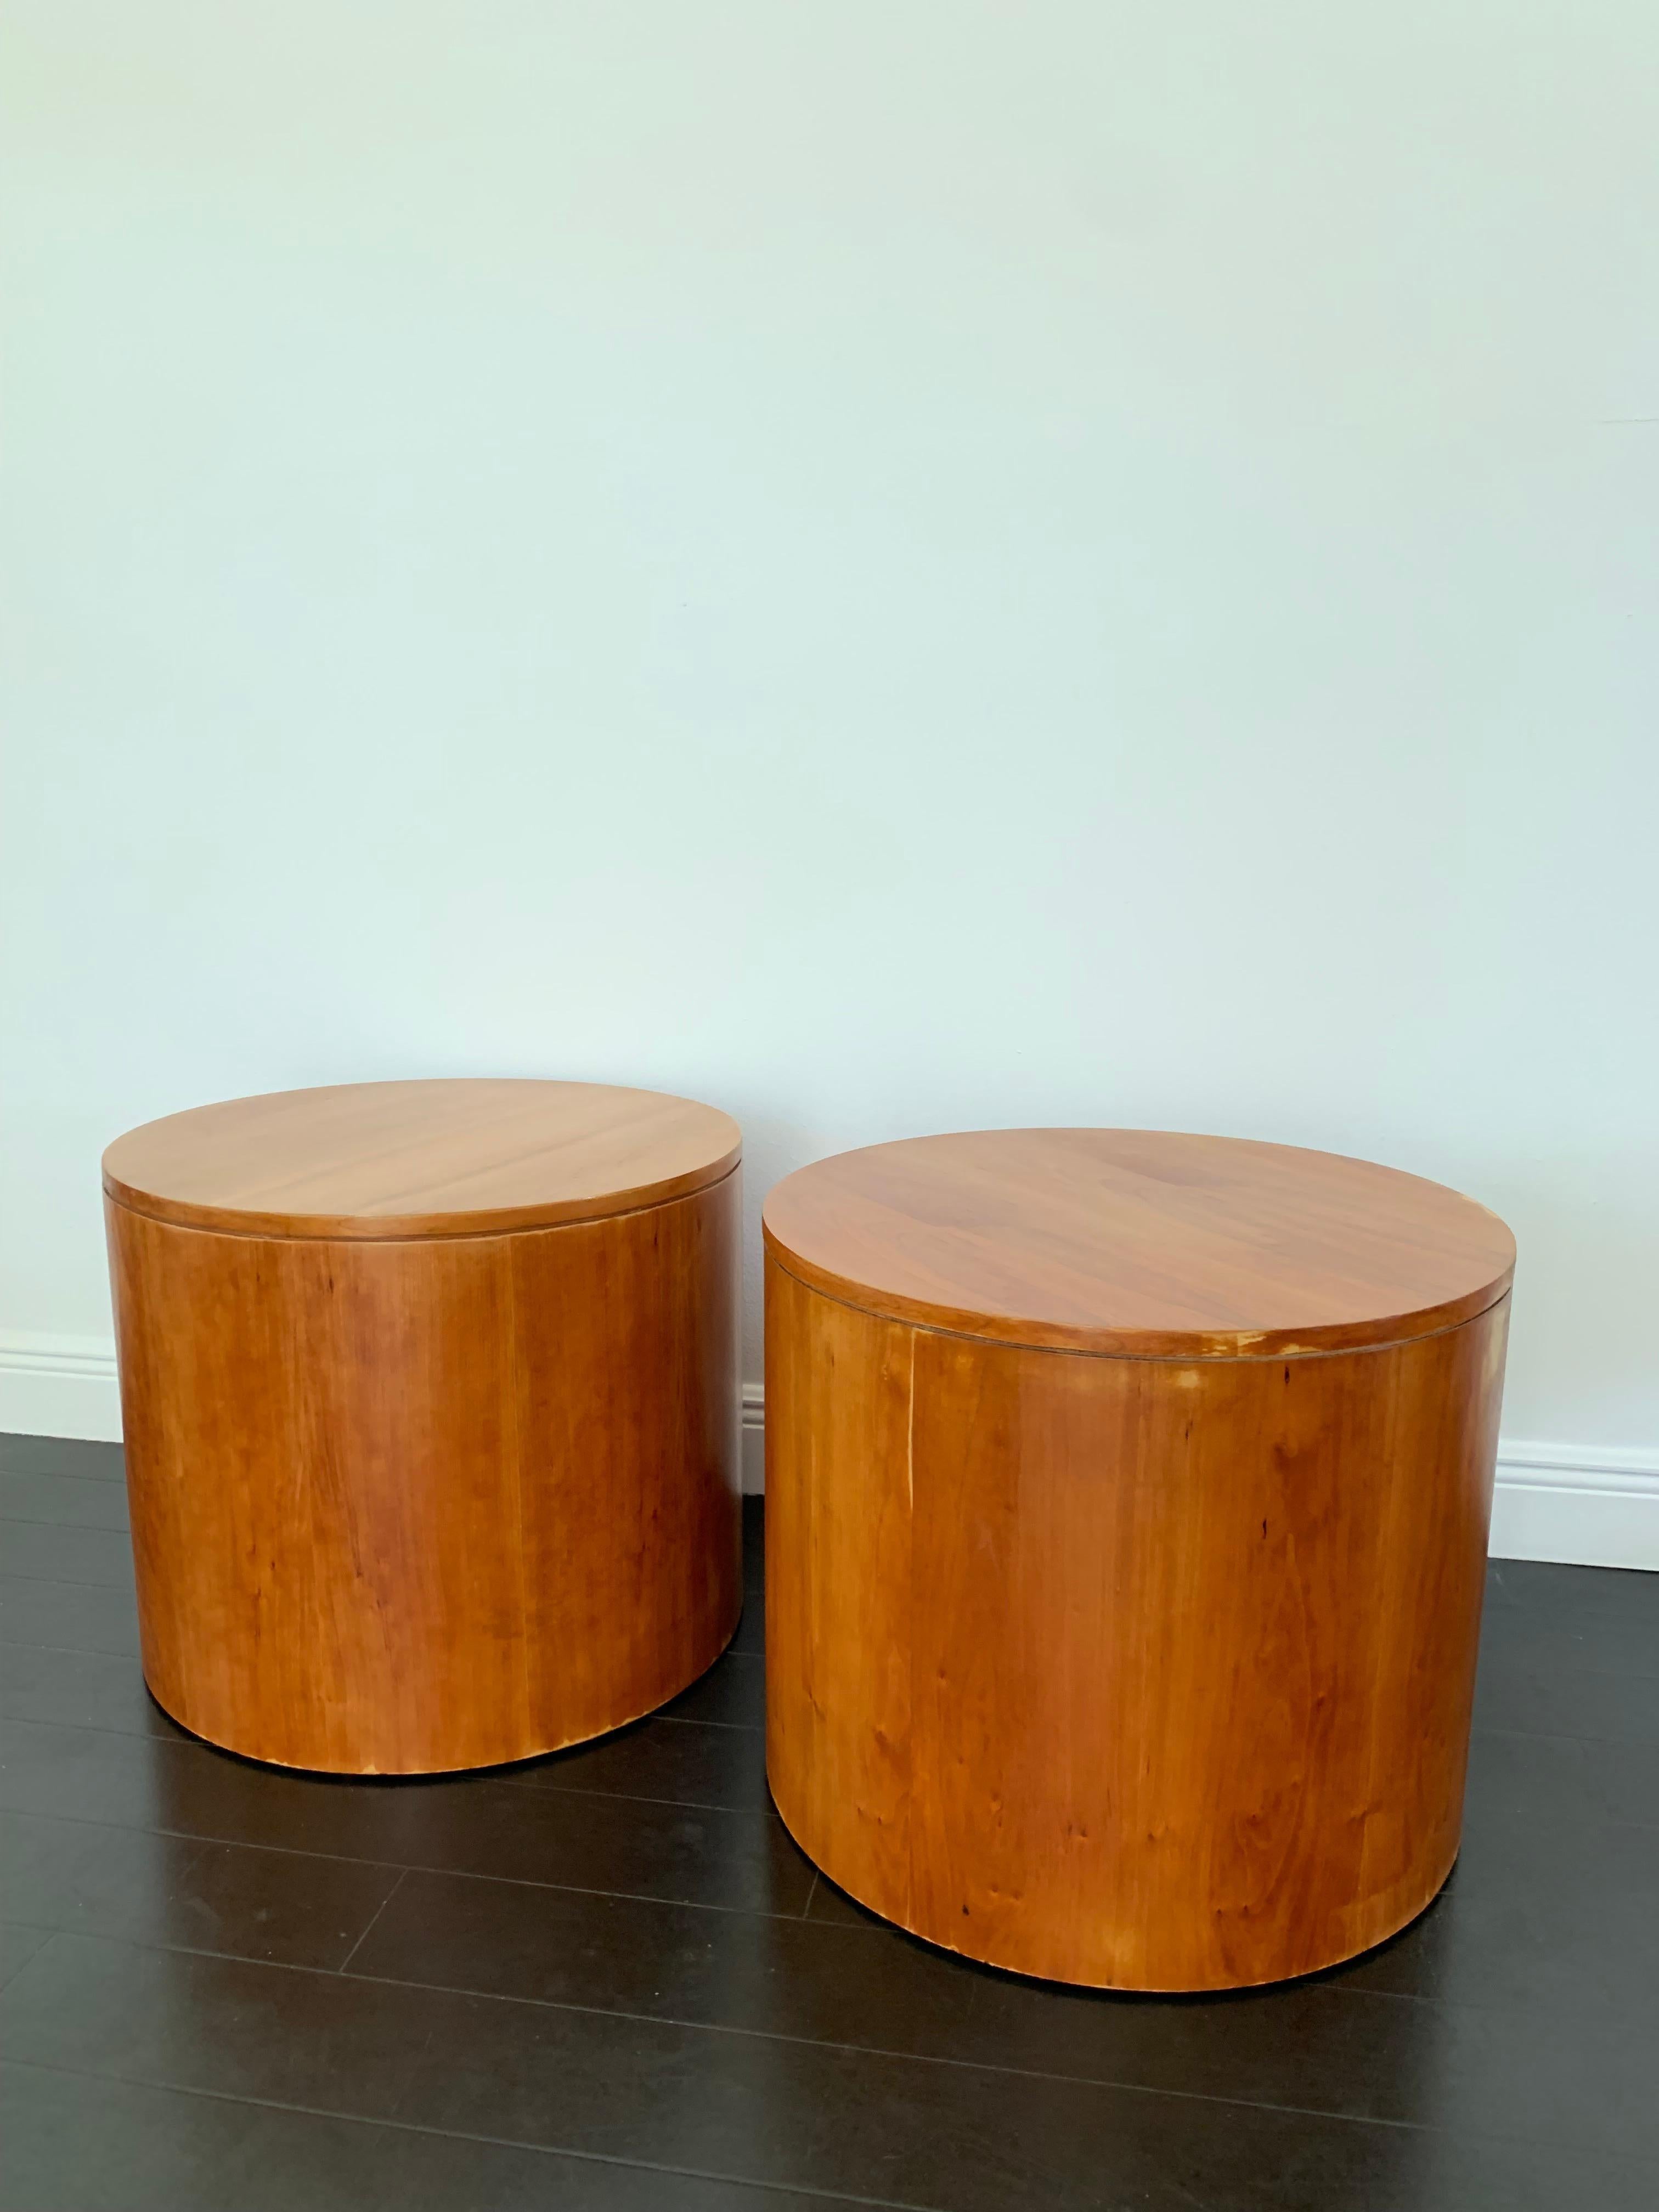 20th Century Danish Teak Cylinder End Tables perfect for any room of your home. Exceptionally large and with a beautiful wood grain and color. Light fading and patina on certain spots but definitely not a deal breaker.